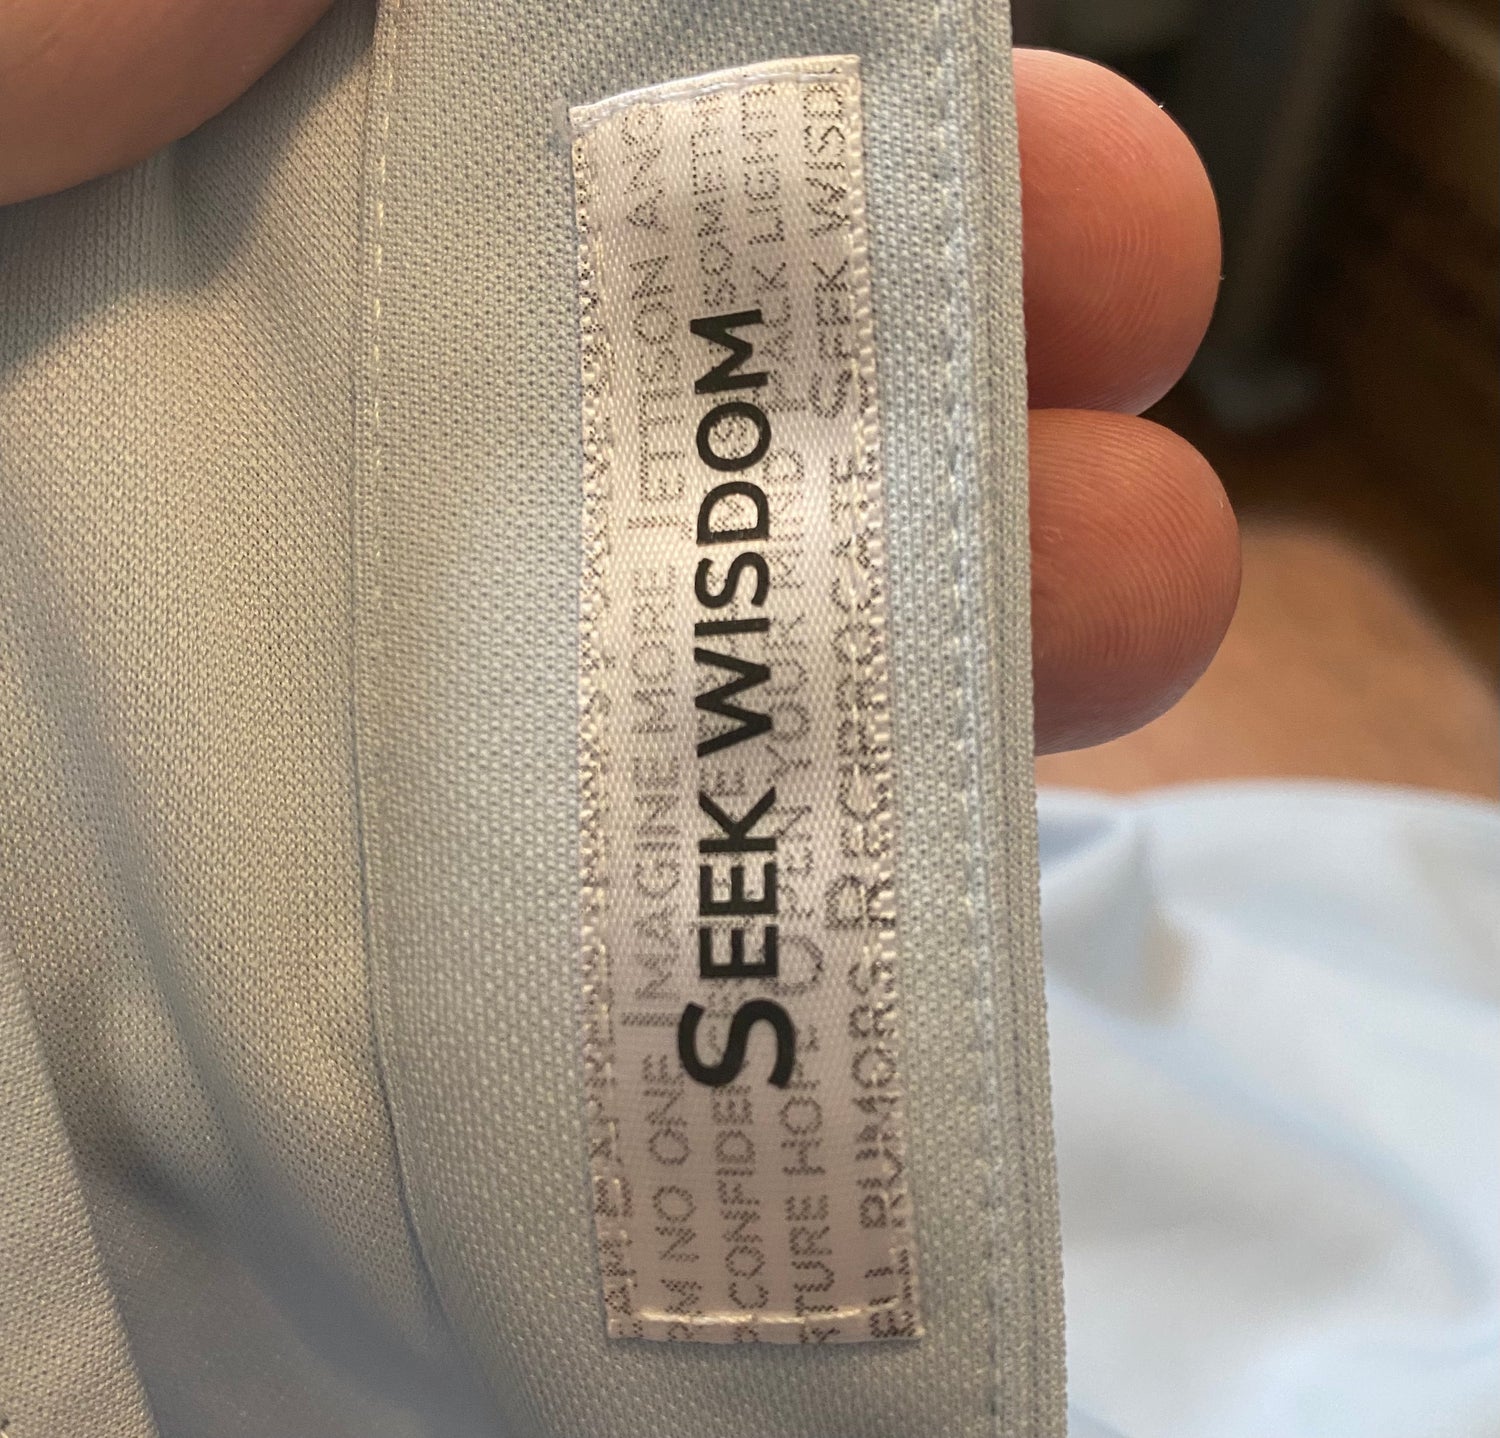 Cheegs hidden messages on the placket of their luxury dress shirts